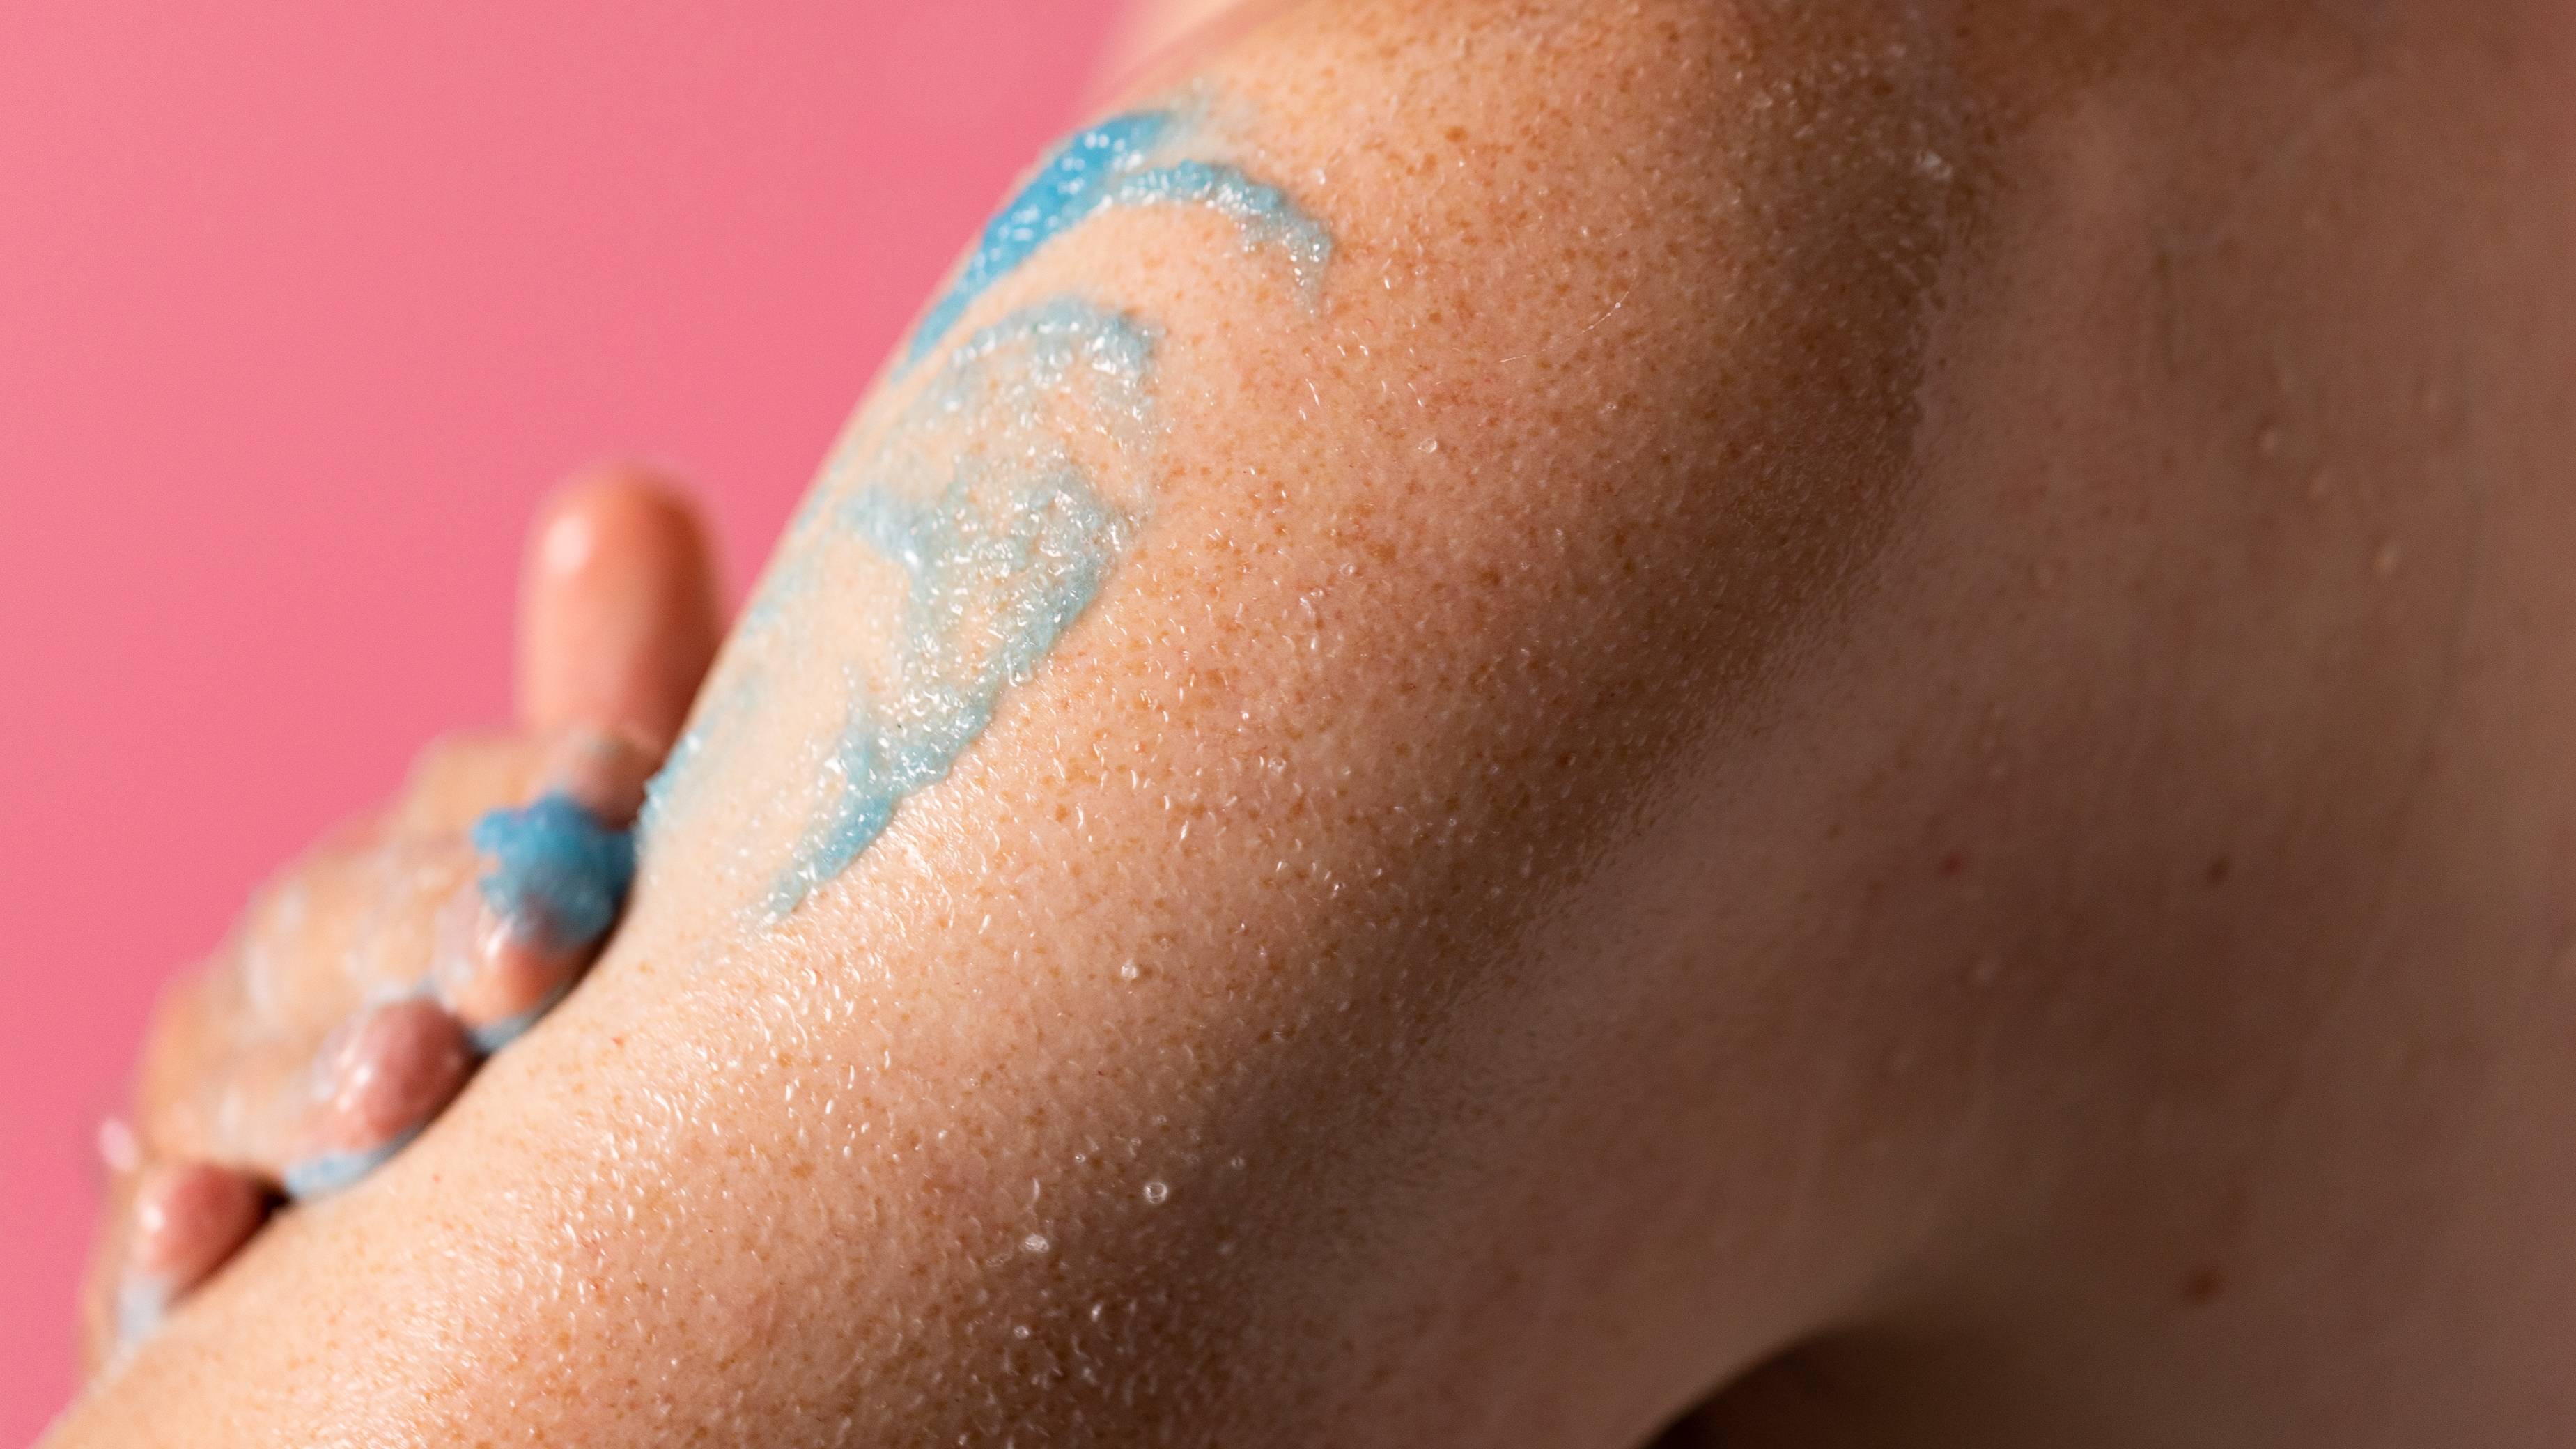 The image shows a close-up of the model exfoliating their skin with the blue, Rub Rub Rub body scrub. 